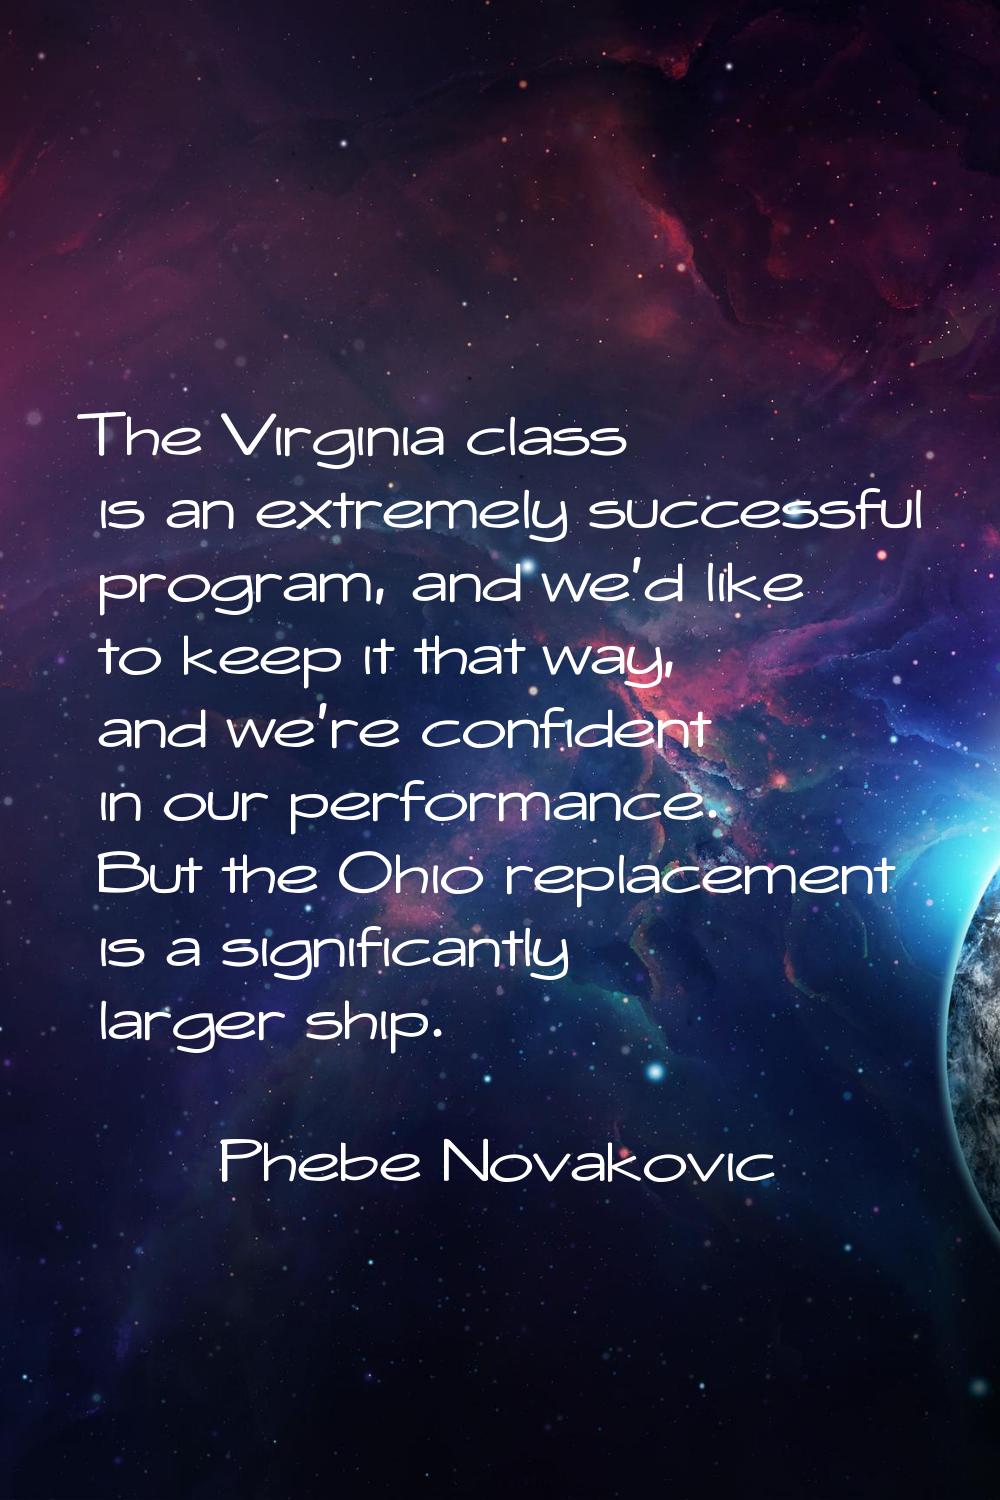 The Virginia class is an extremely successful program, and we'd like to keep it that way, and we're